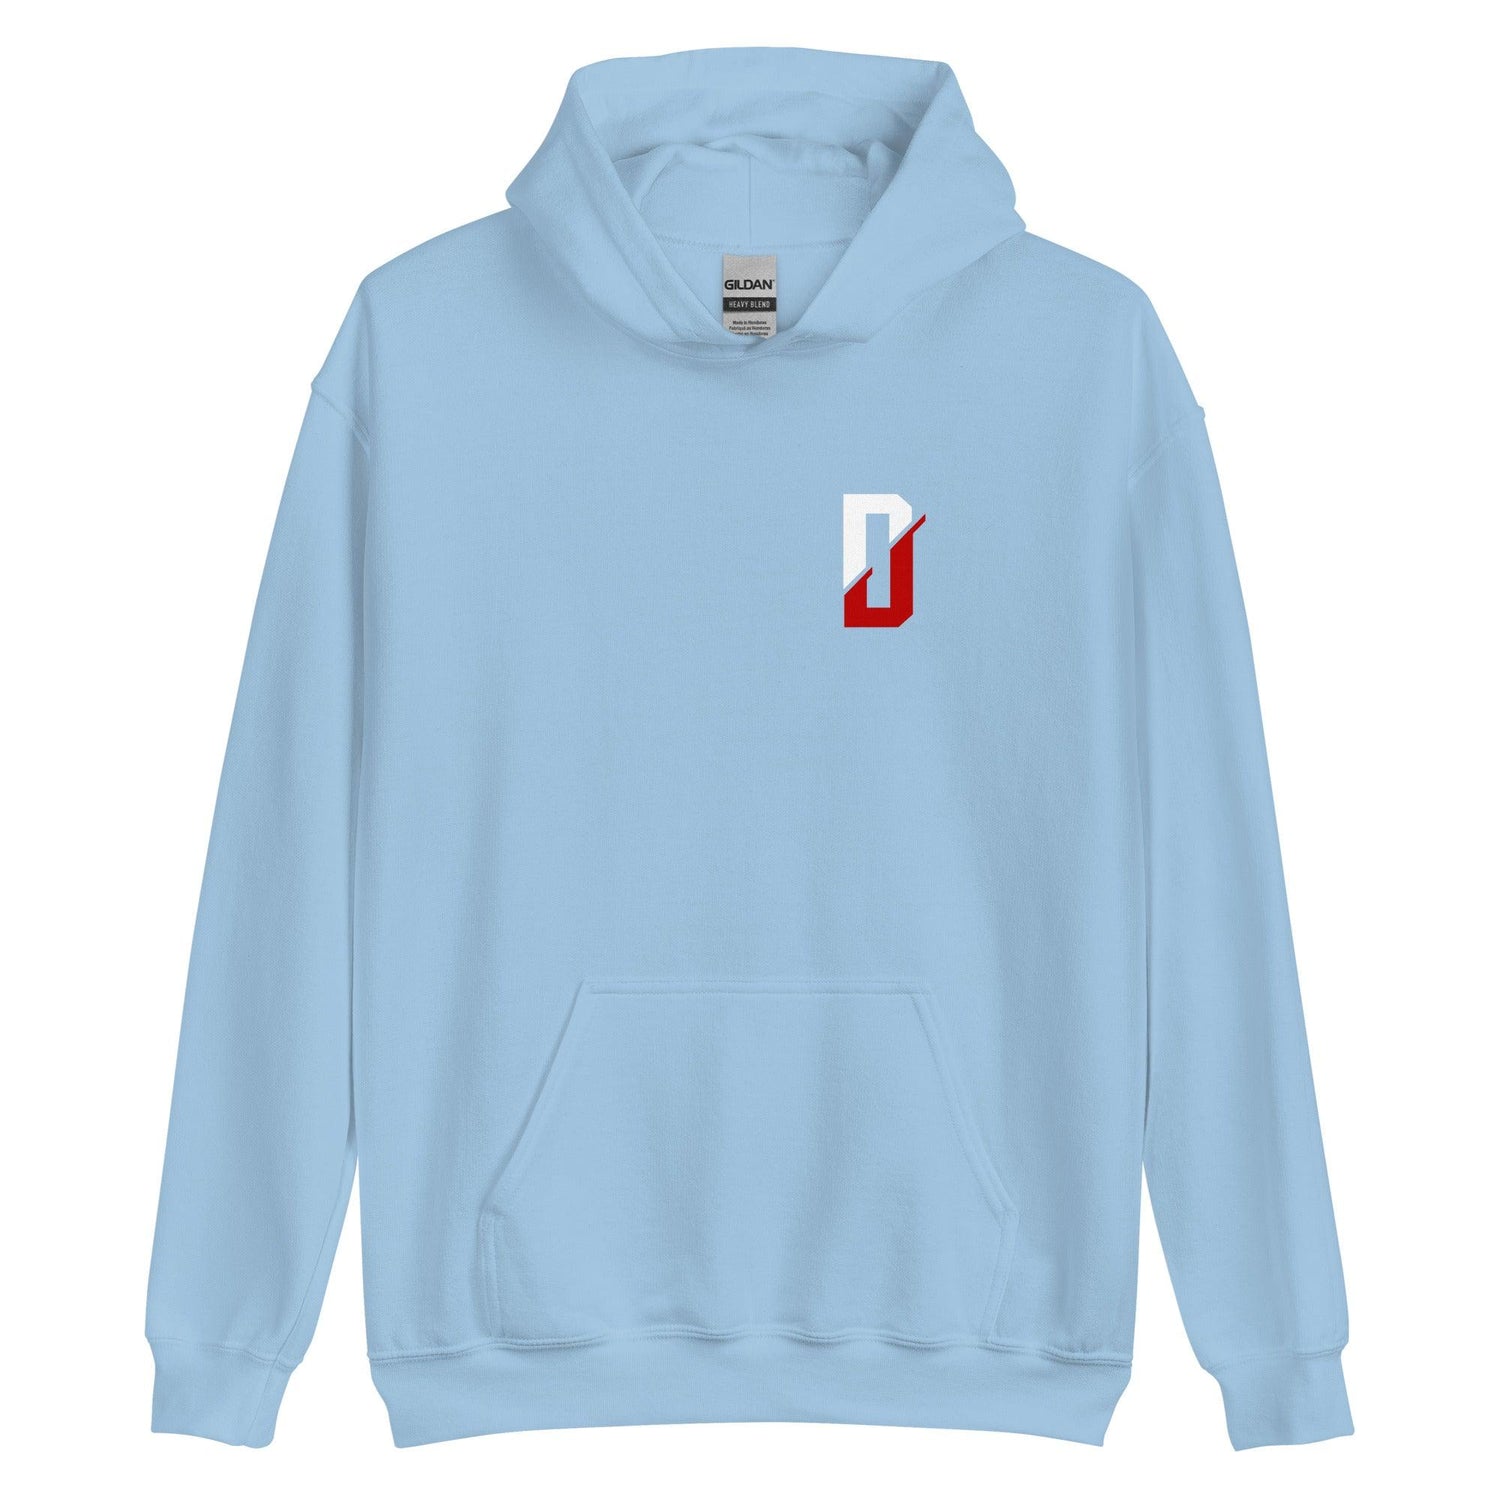 Jay Driver “Signature” Hoodie - Fan Arch